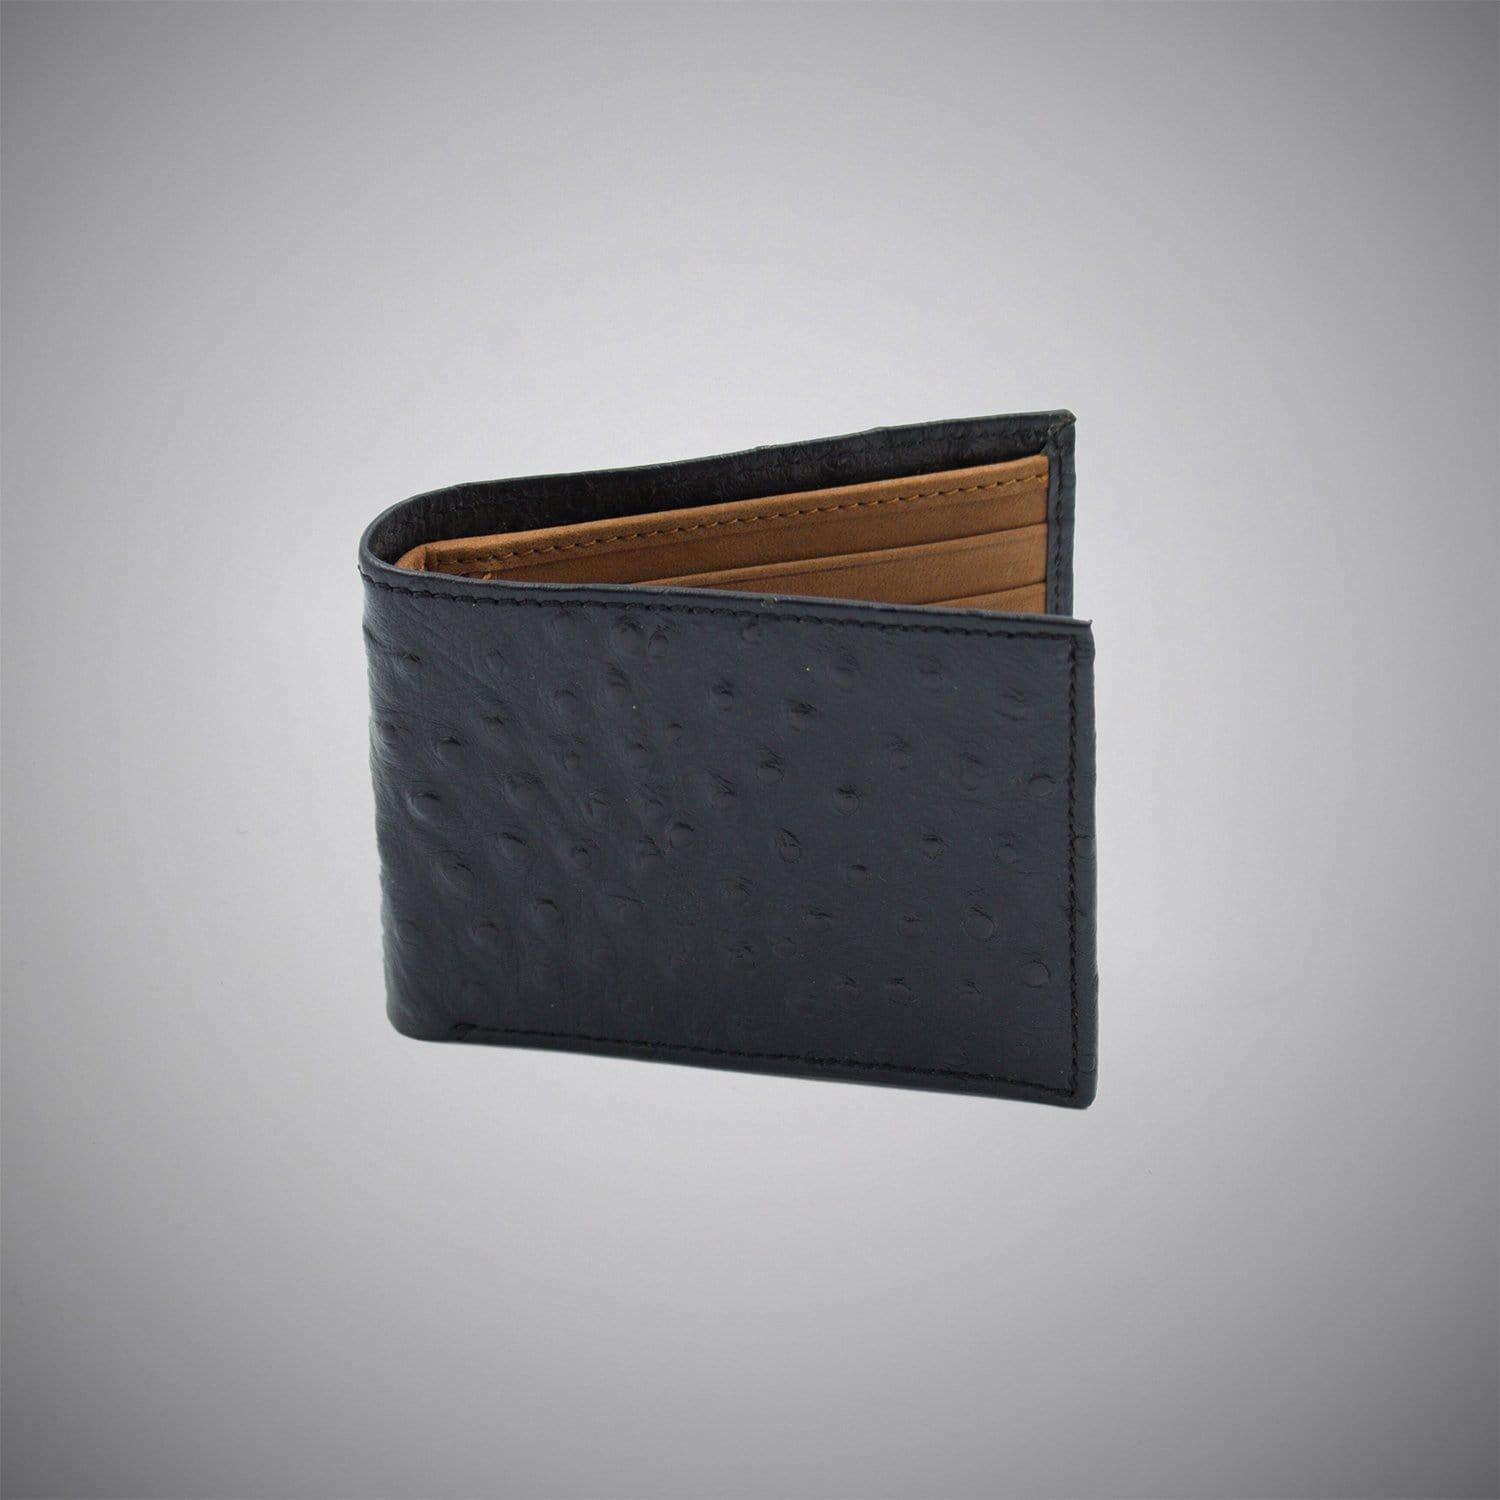 Black Ostrich Skin Embossed Calf Leather Wallet With Tan Suede Interior - Just White Shirts